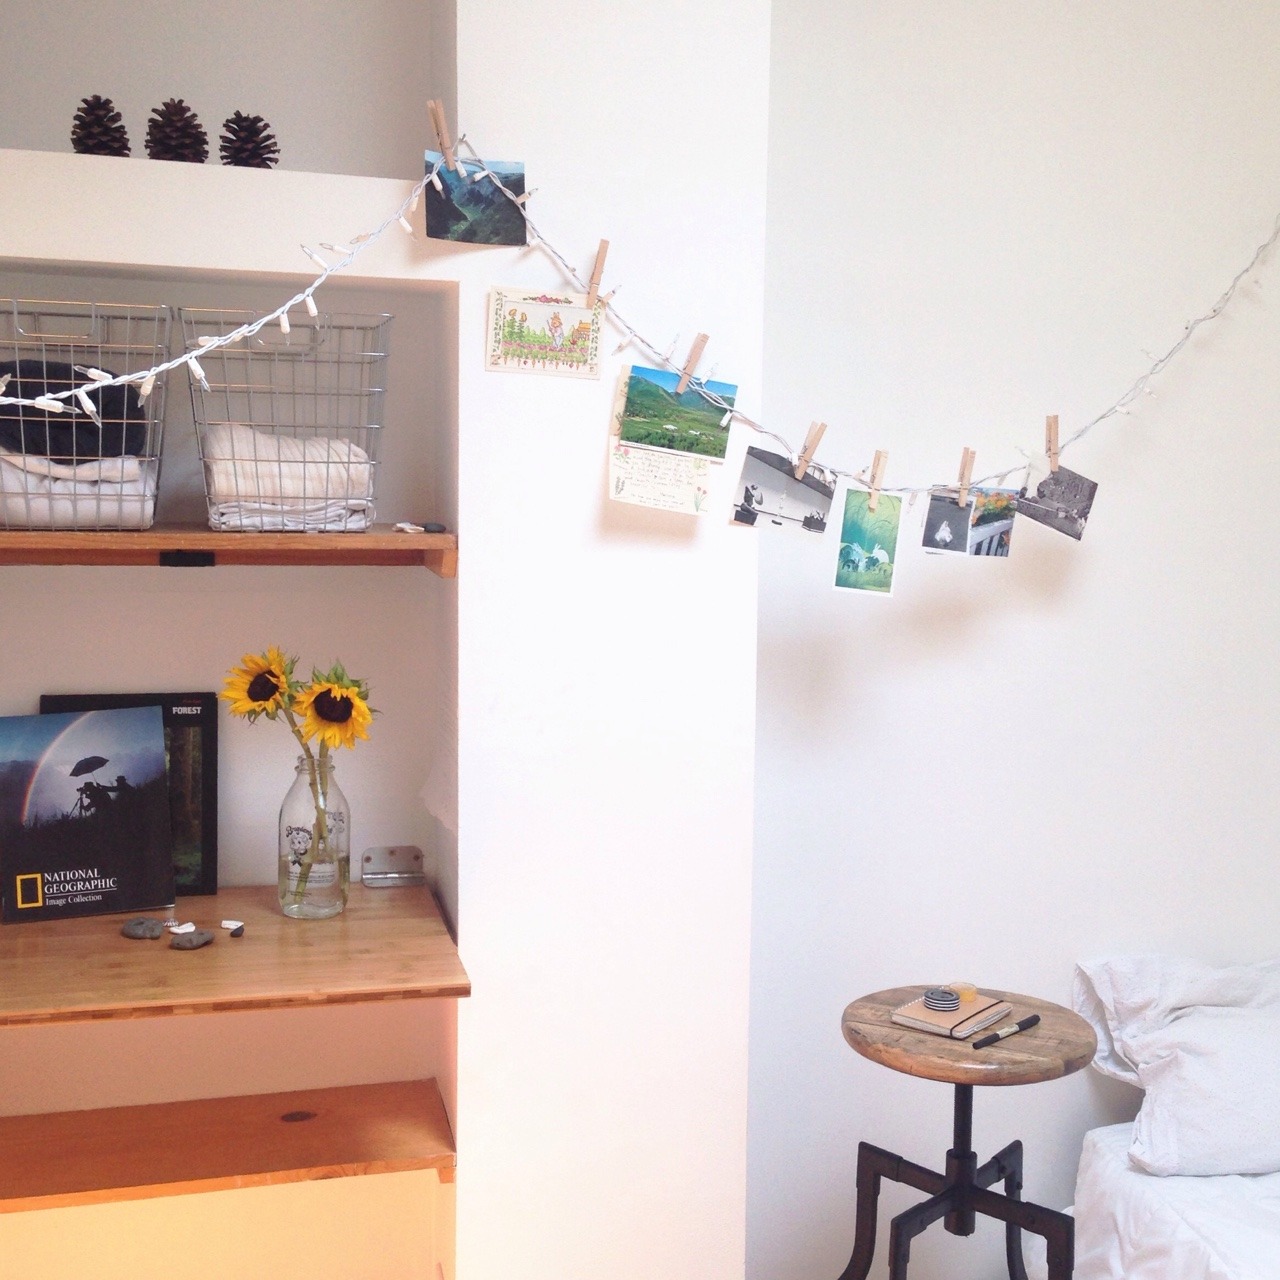 girlfig:  Here are some little snaps of my room! It’s very small and doesn’t